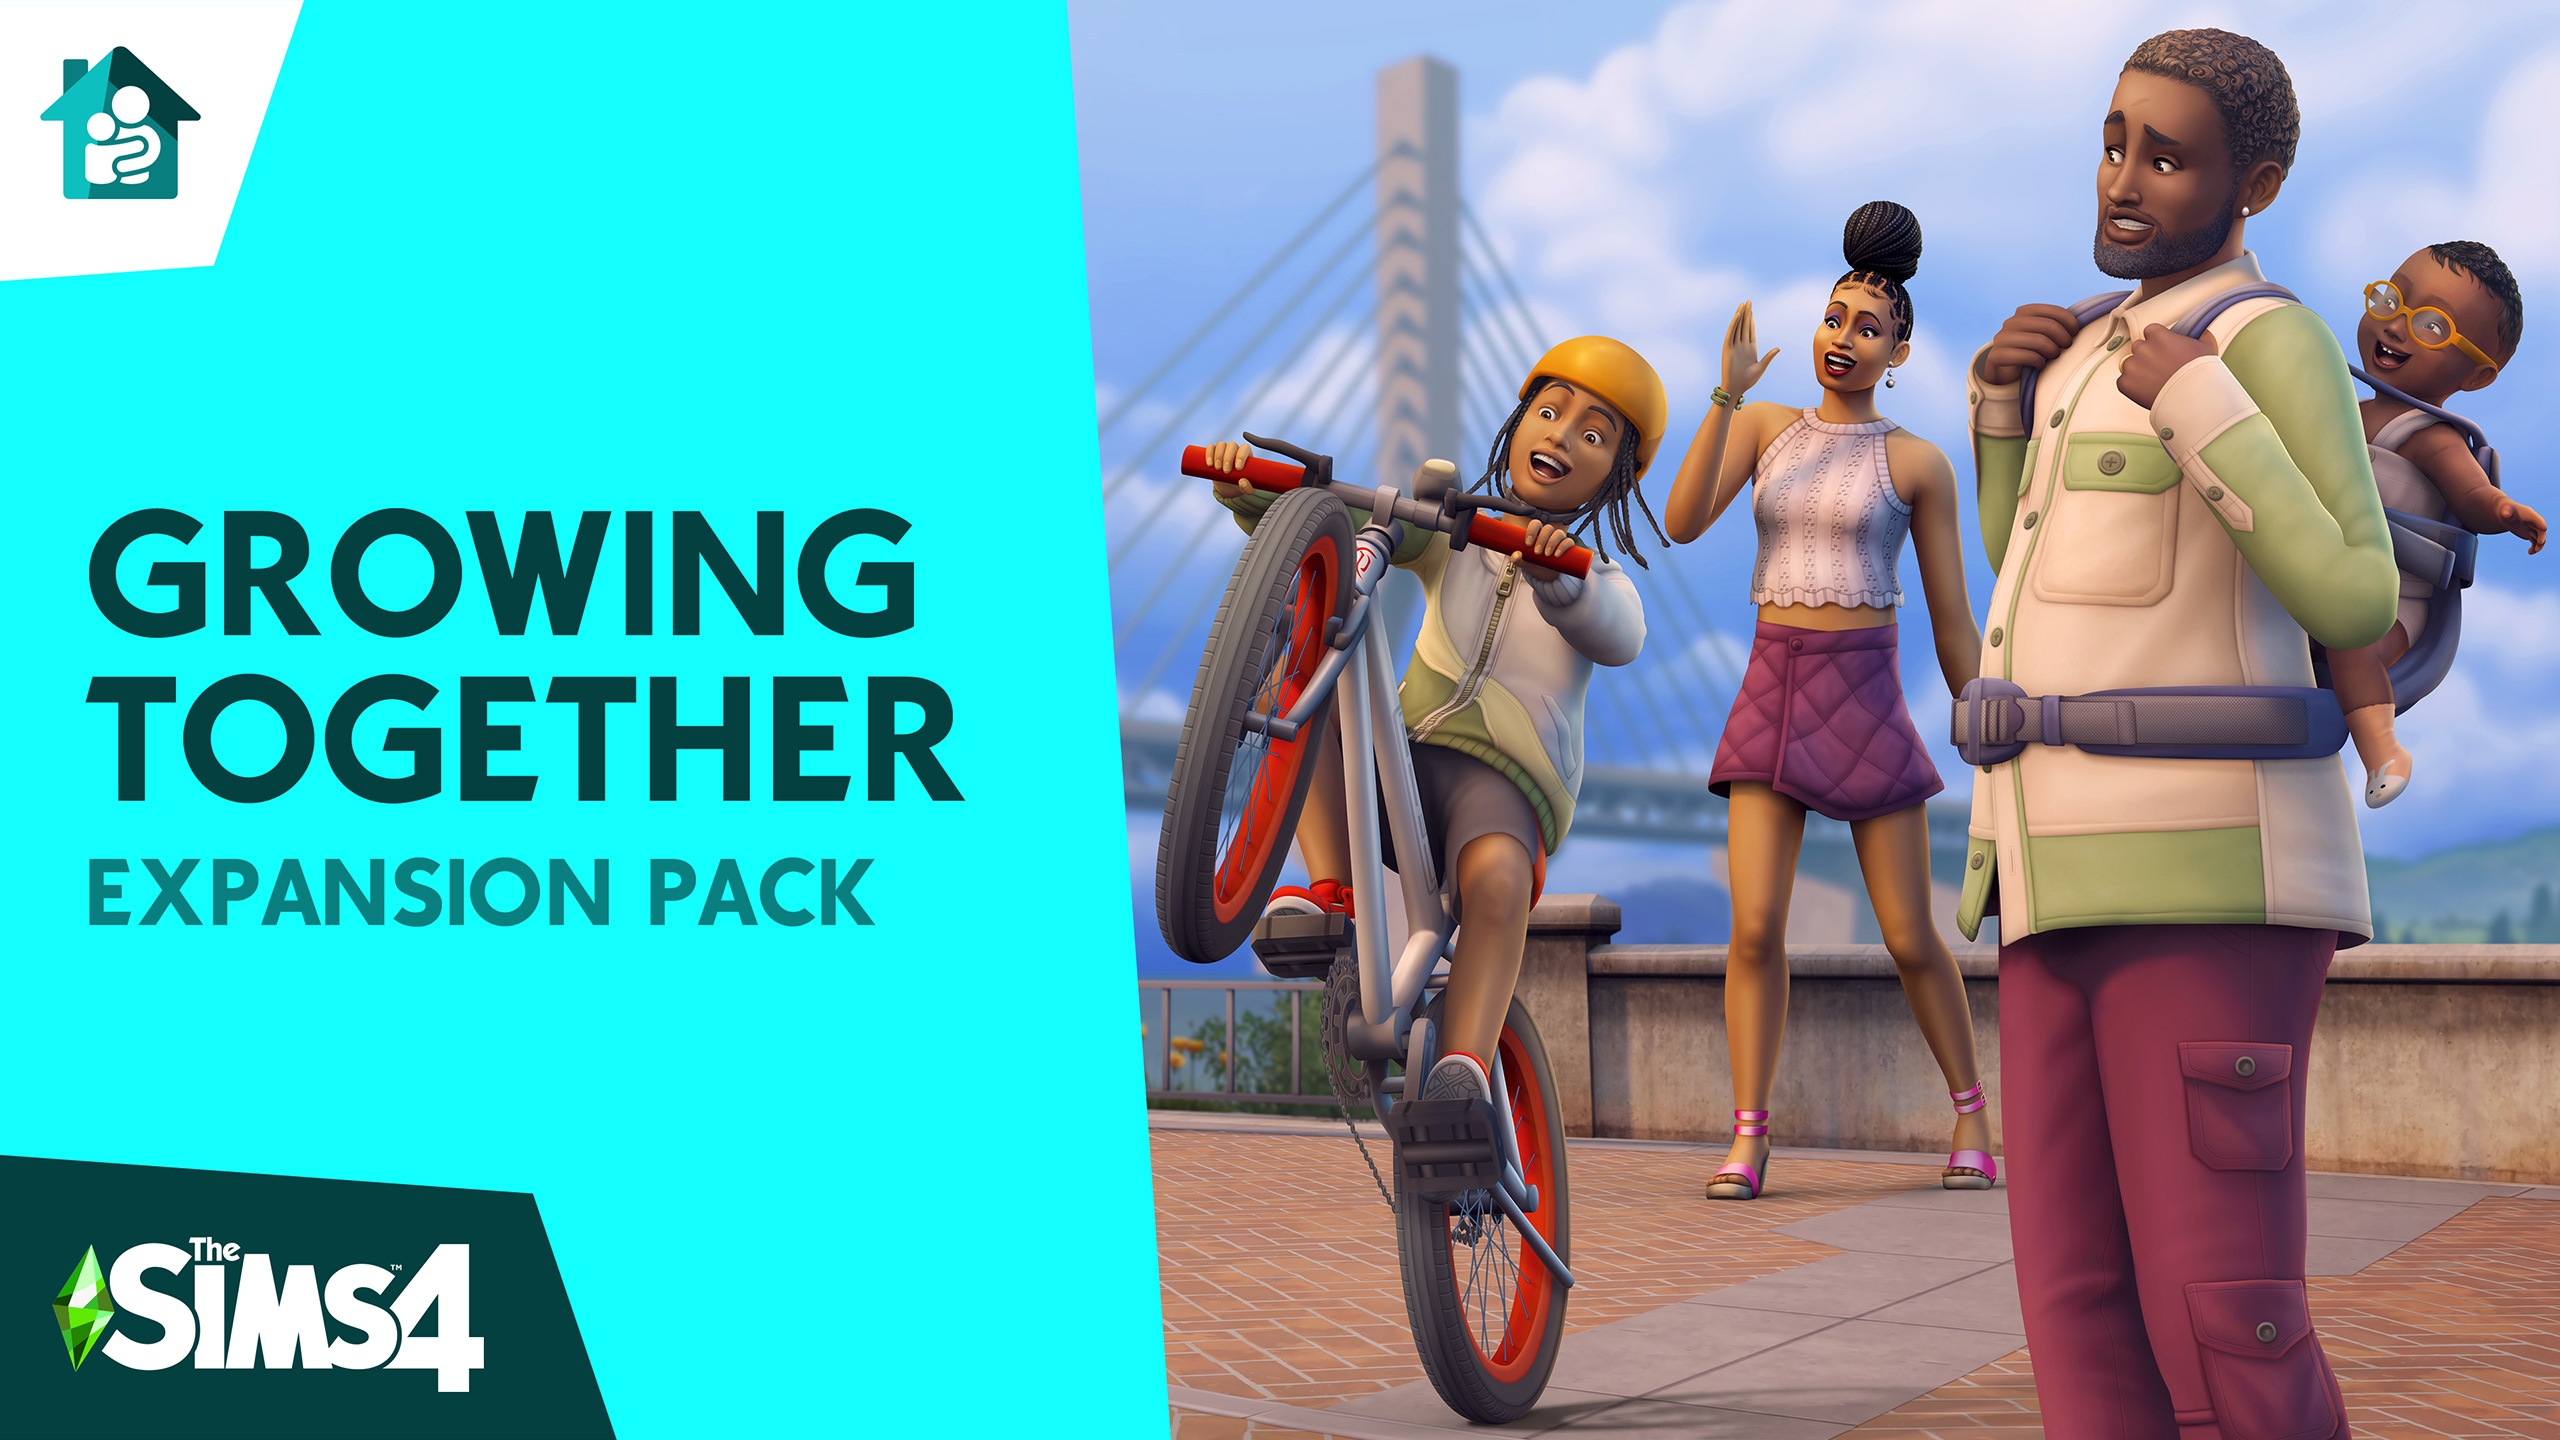 The Sims 4 Get to Work Expansion Pack DLC for PC Game Origin Key Region Free